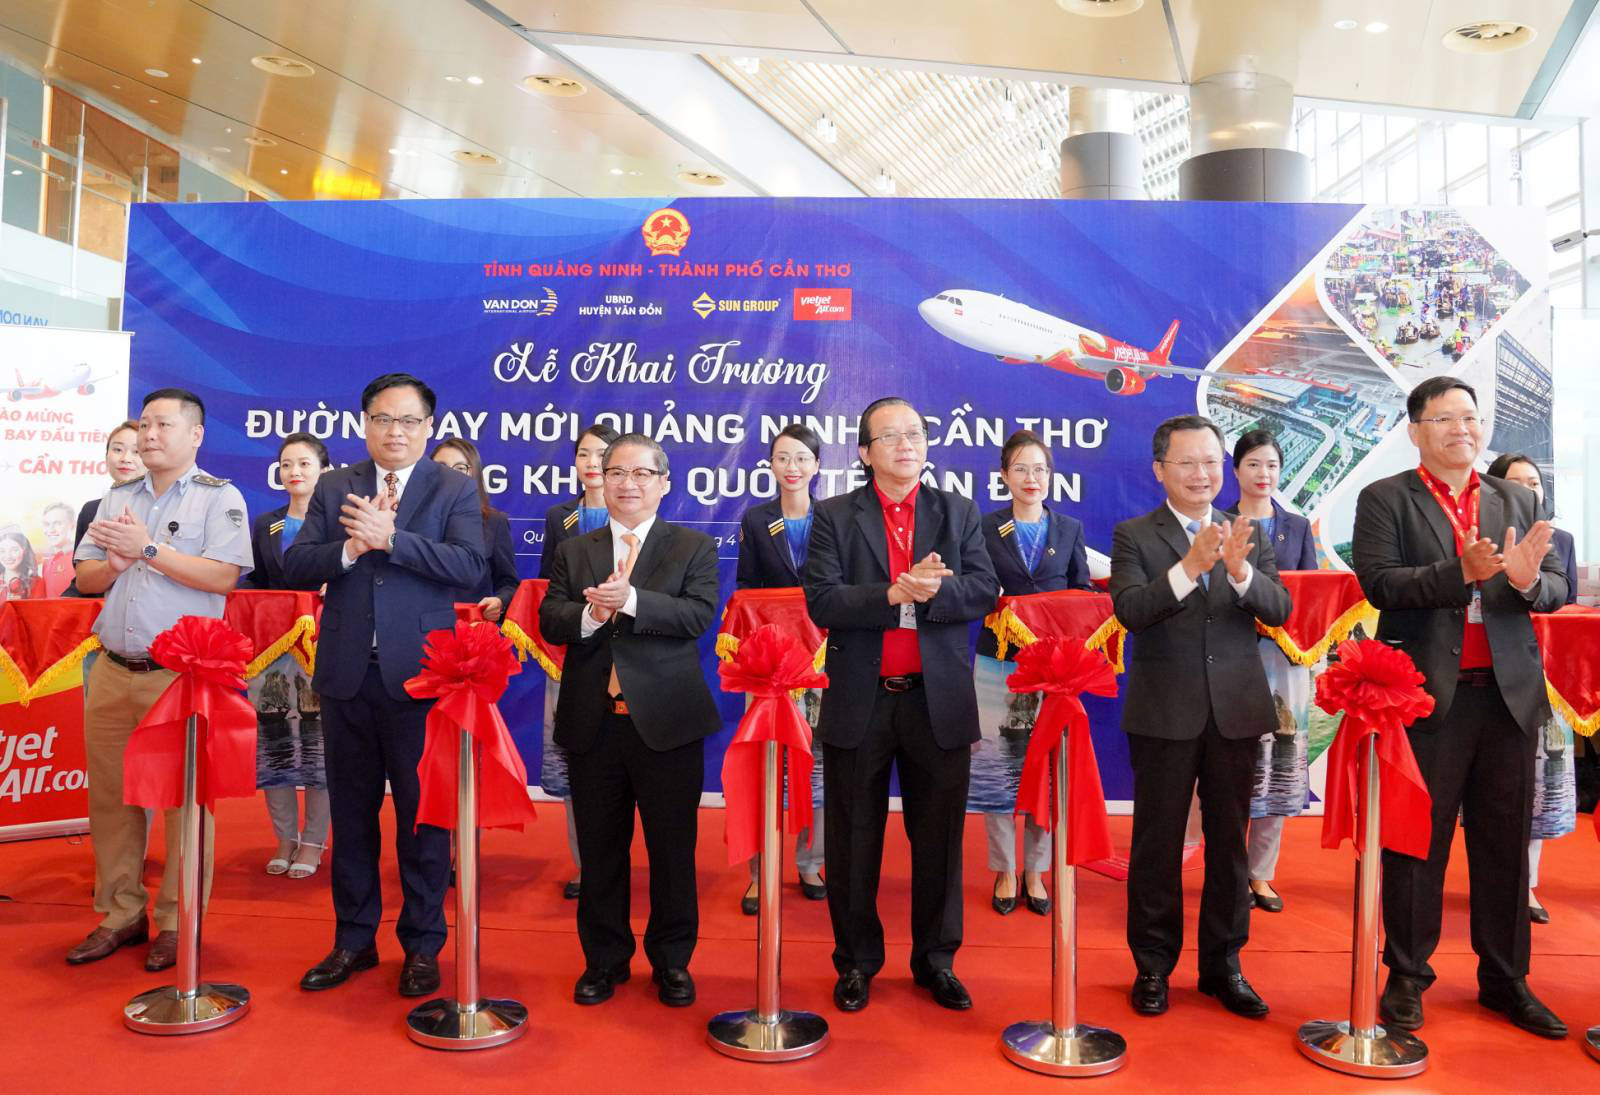 Tran Viet Thuong (1st row, L, 3rd), chairman of the Can Tho People’s Committee; Cao Tuong Huy (1st row, R, 2nd), acting chairman of the Quang Ninh People’s Committee; and Do Xuan Quang (1st row, R, 3rd), deputy general director at Vietjet, a Vietnamese budget carrier, attend the launching ceremony of the Can Tho-Quang Ninh air route, April 25, 2023. Photo: Tuoi Tre